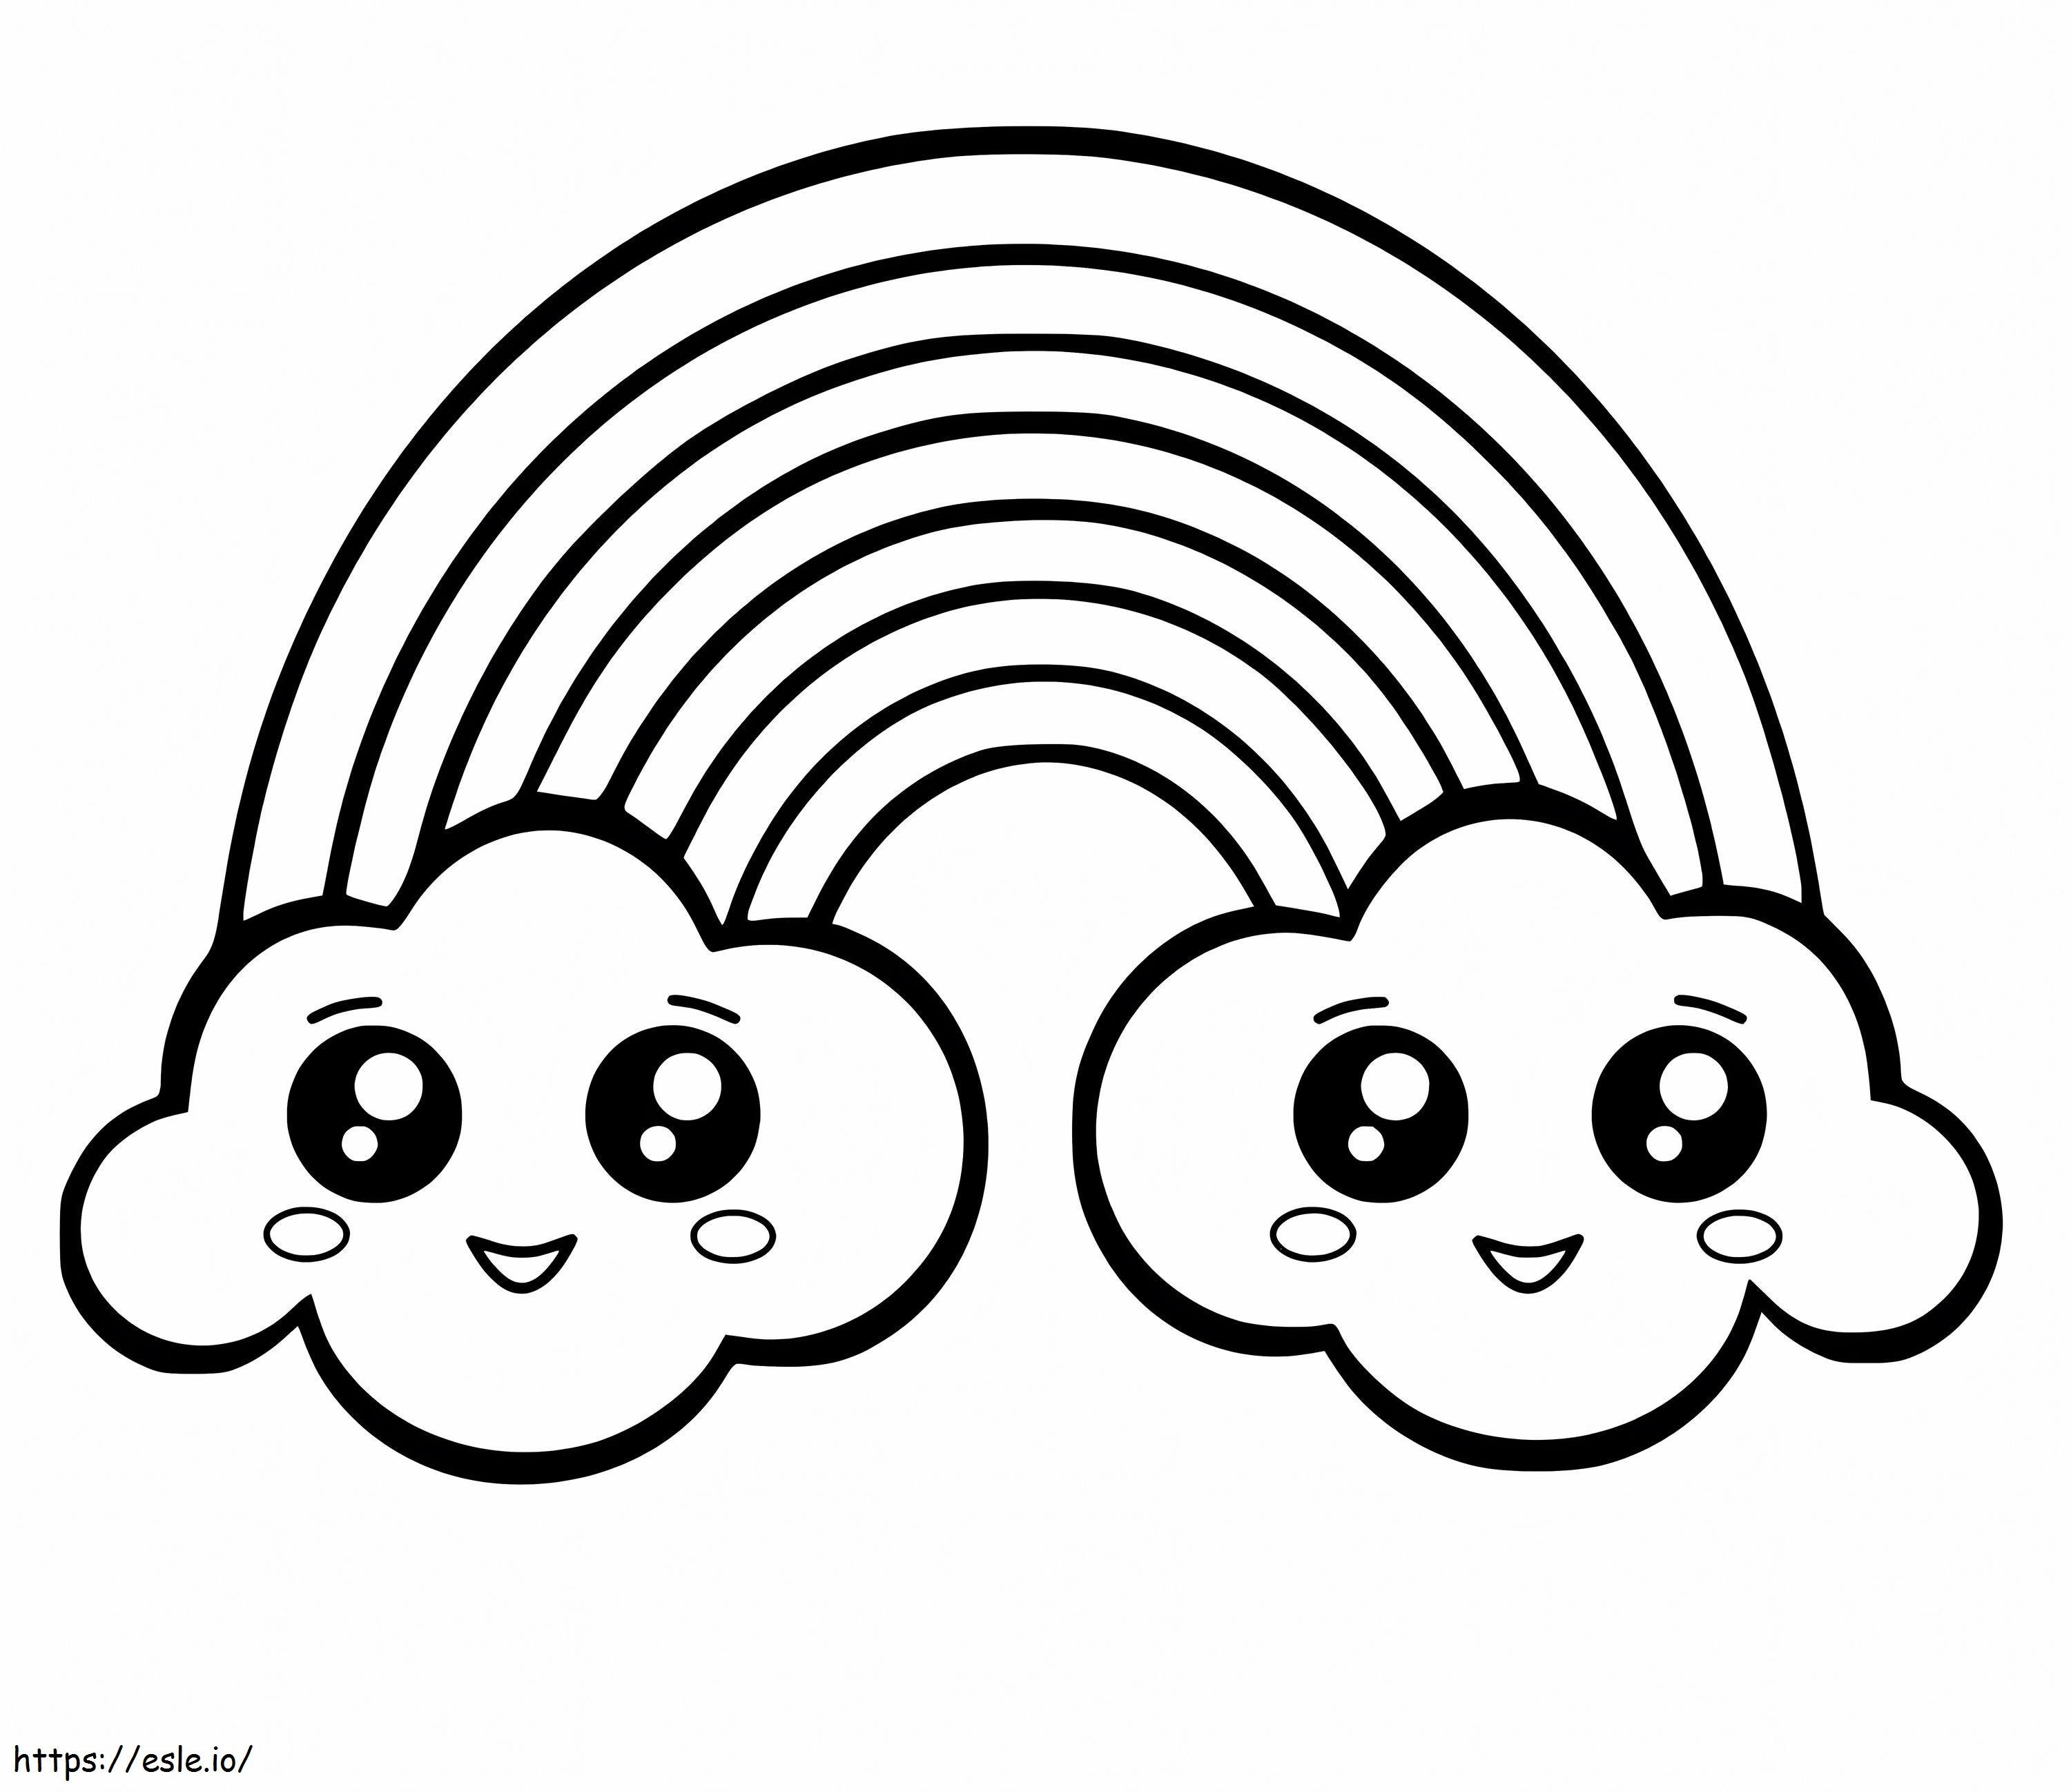 Rainbow With Pretty Clouds coloring page